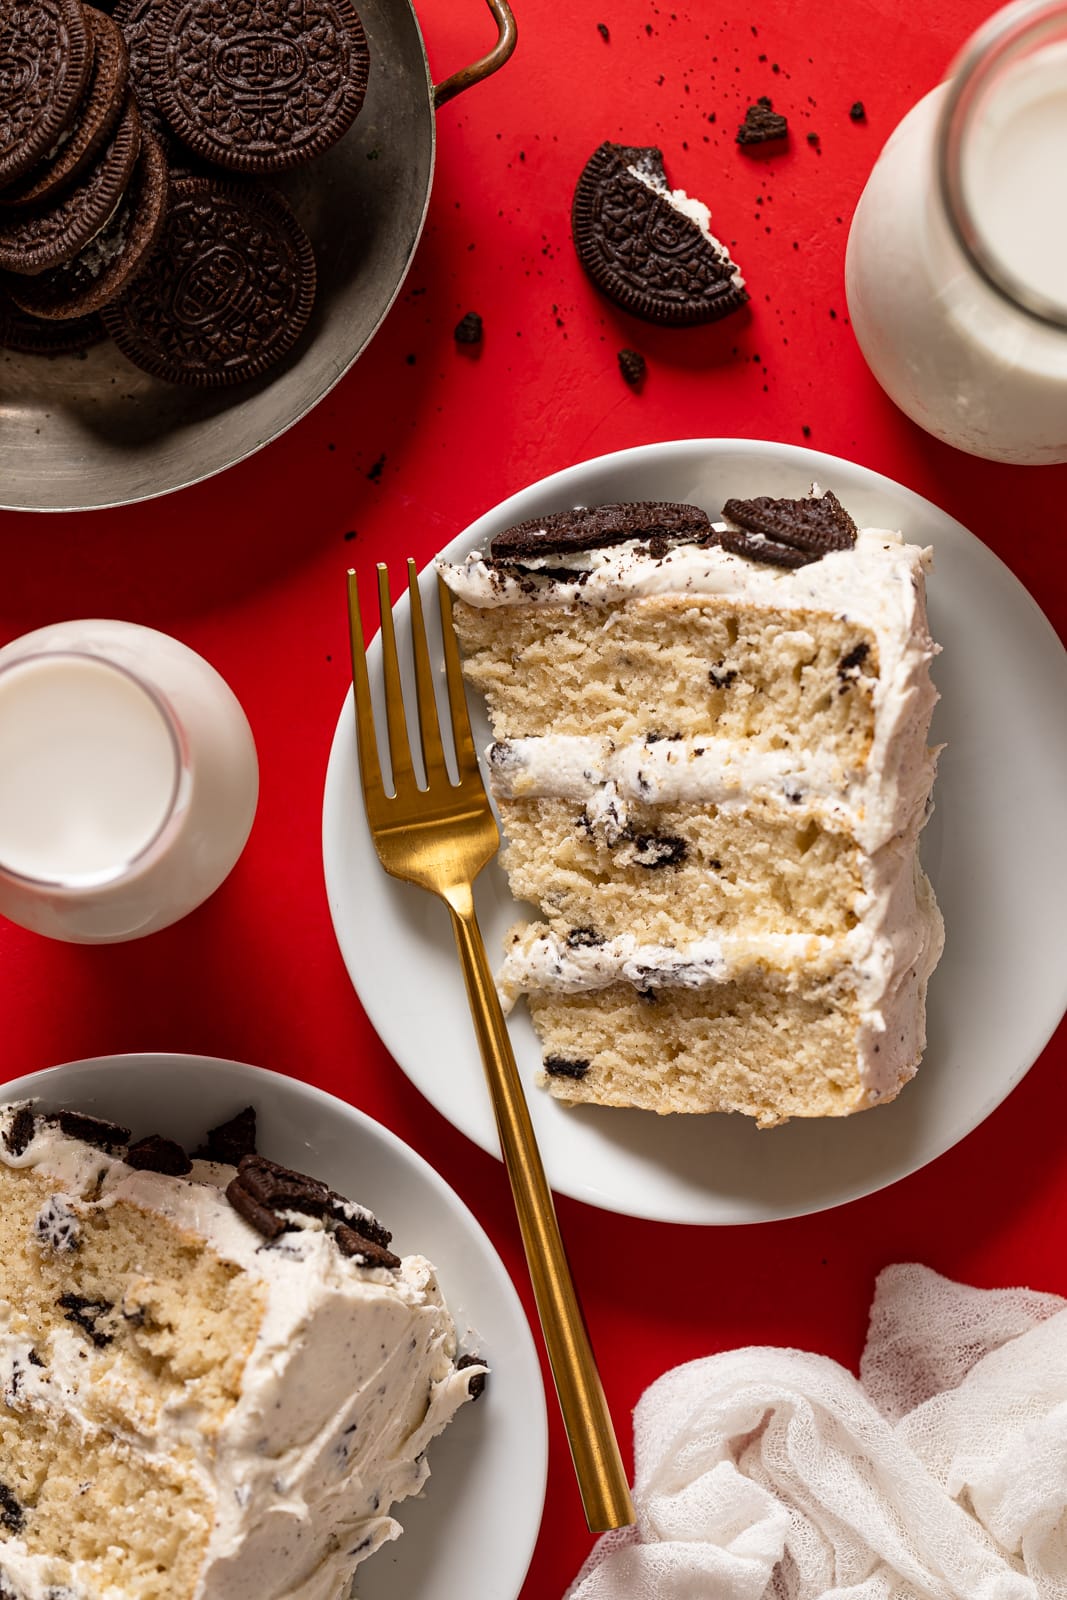 Three Vanilla oreo cake slices on white plates with two forms, a glass of milk, and Oreo cookie pieces on a red table.